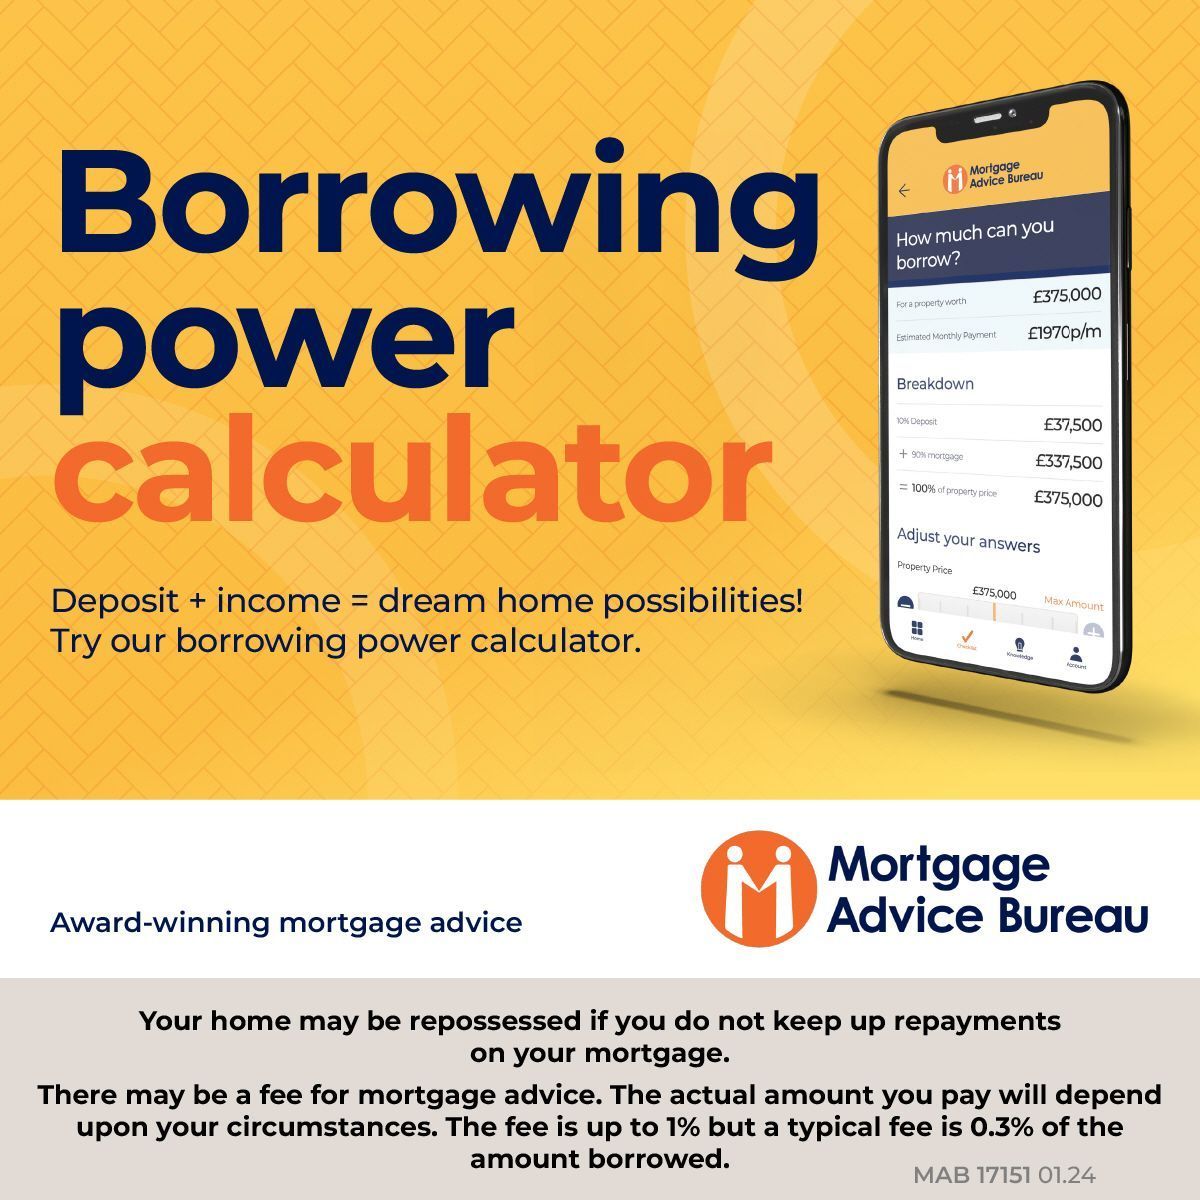 Our borrowing calculator is designed to help you work out how much you borrow, which gets you one step closer to owning your own home: buff.ly/3T2FT6a 🧮🏘
#mortgageadvice #mortgagehelp #mortgagebroker #borrowingcalculator